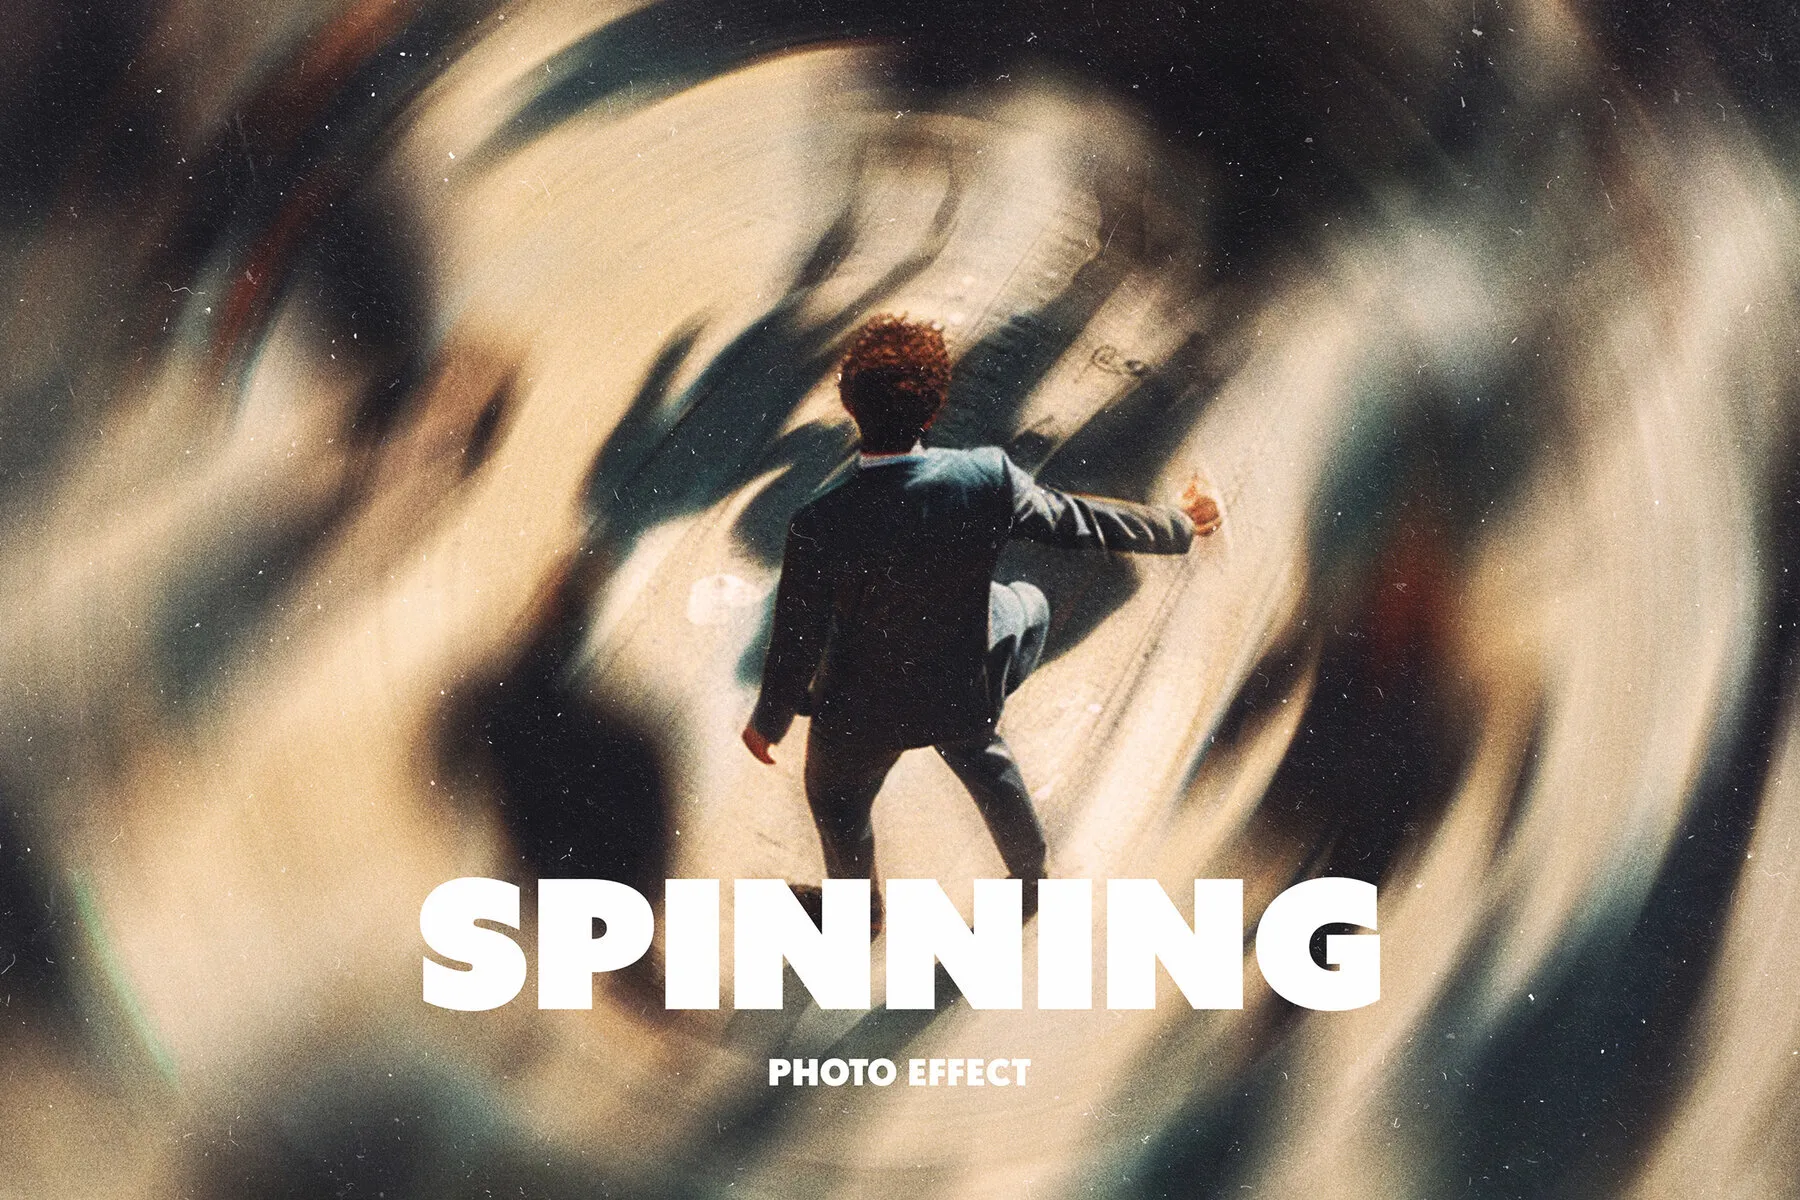 Spinning Blurred Photo Effect